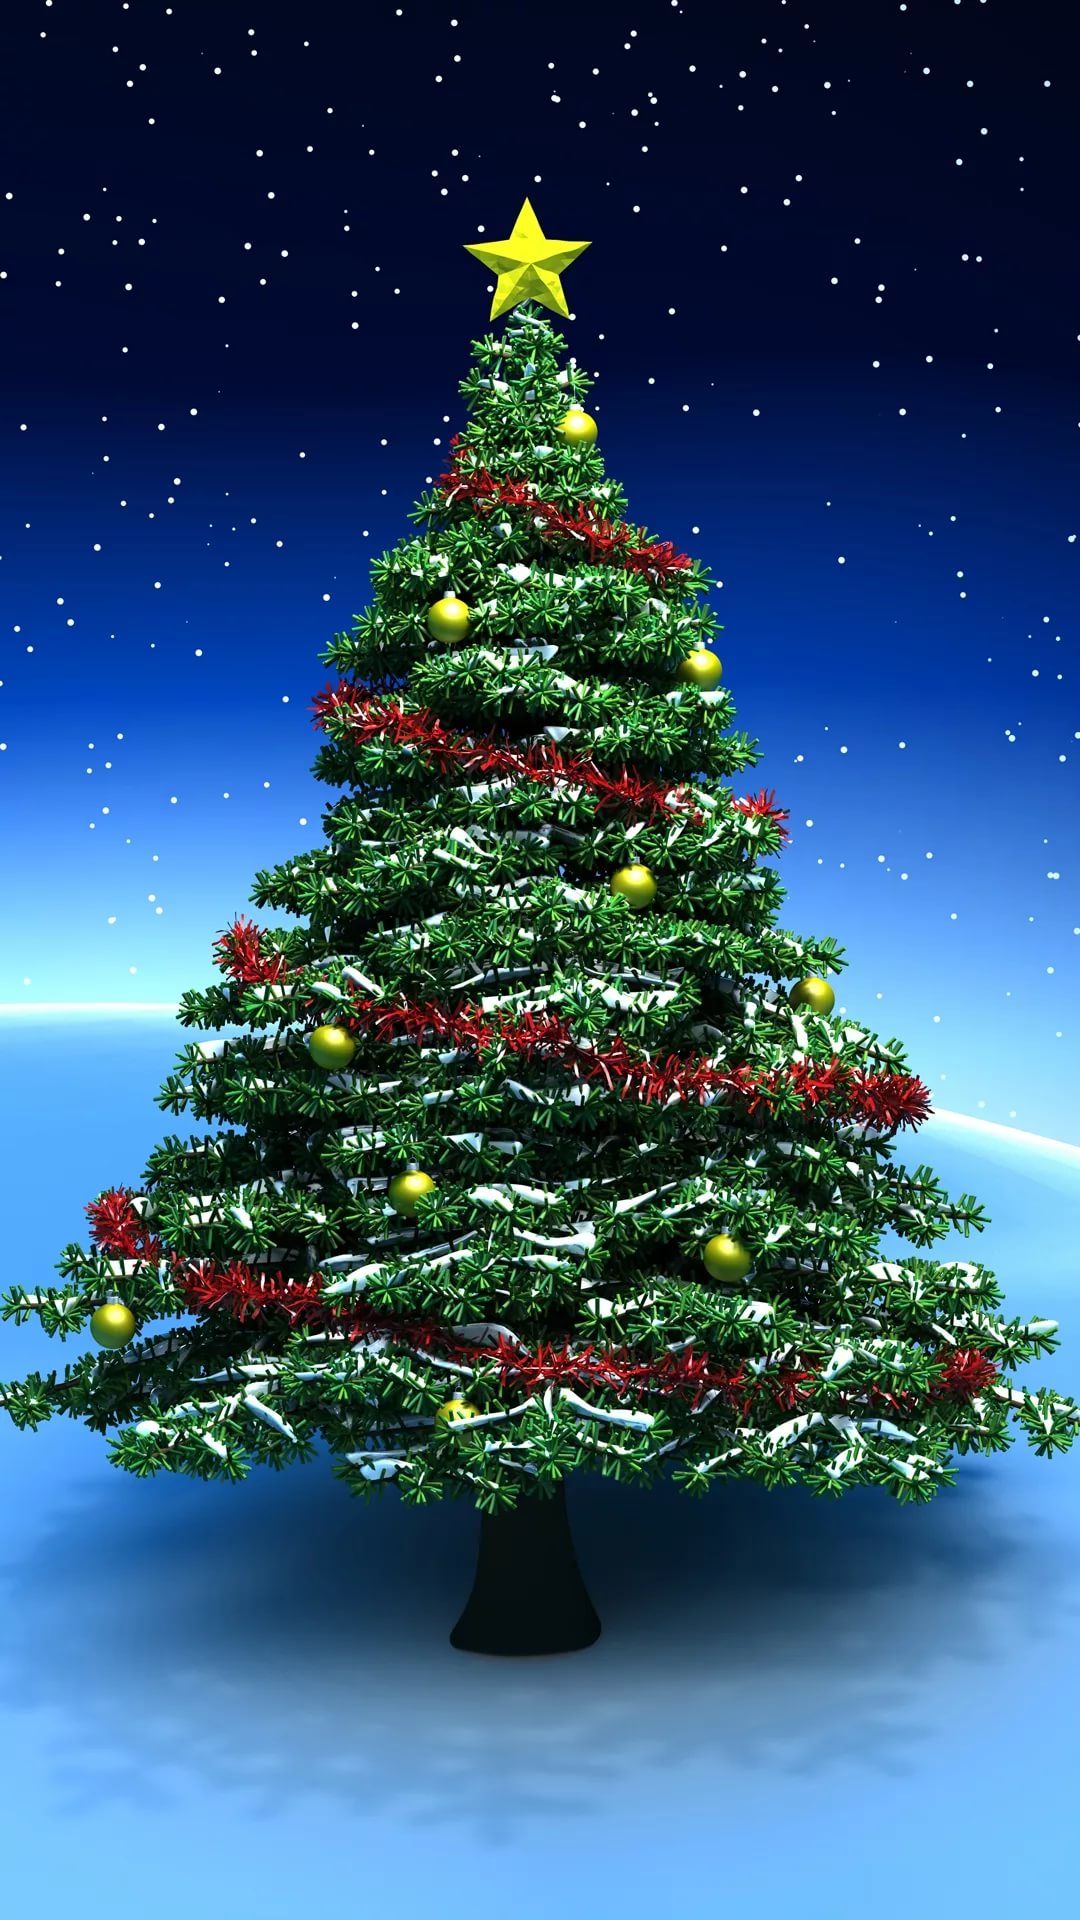 Free Christmas wallpaper for iPhone